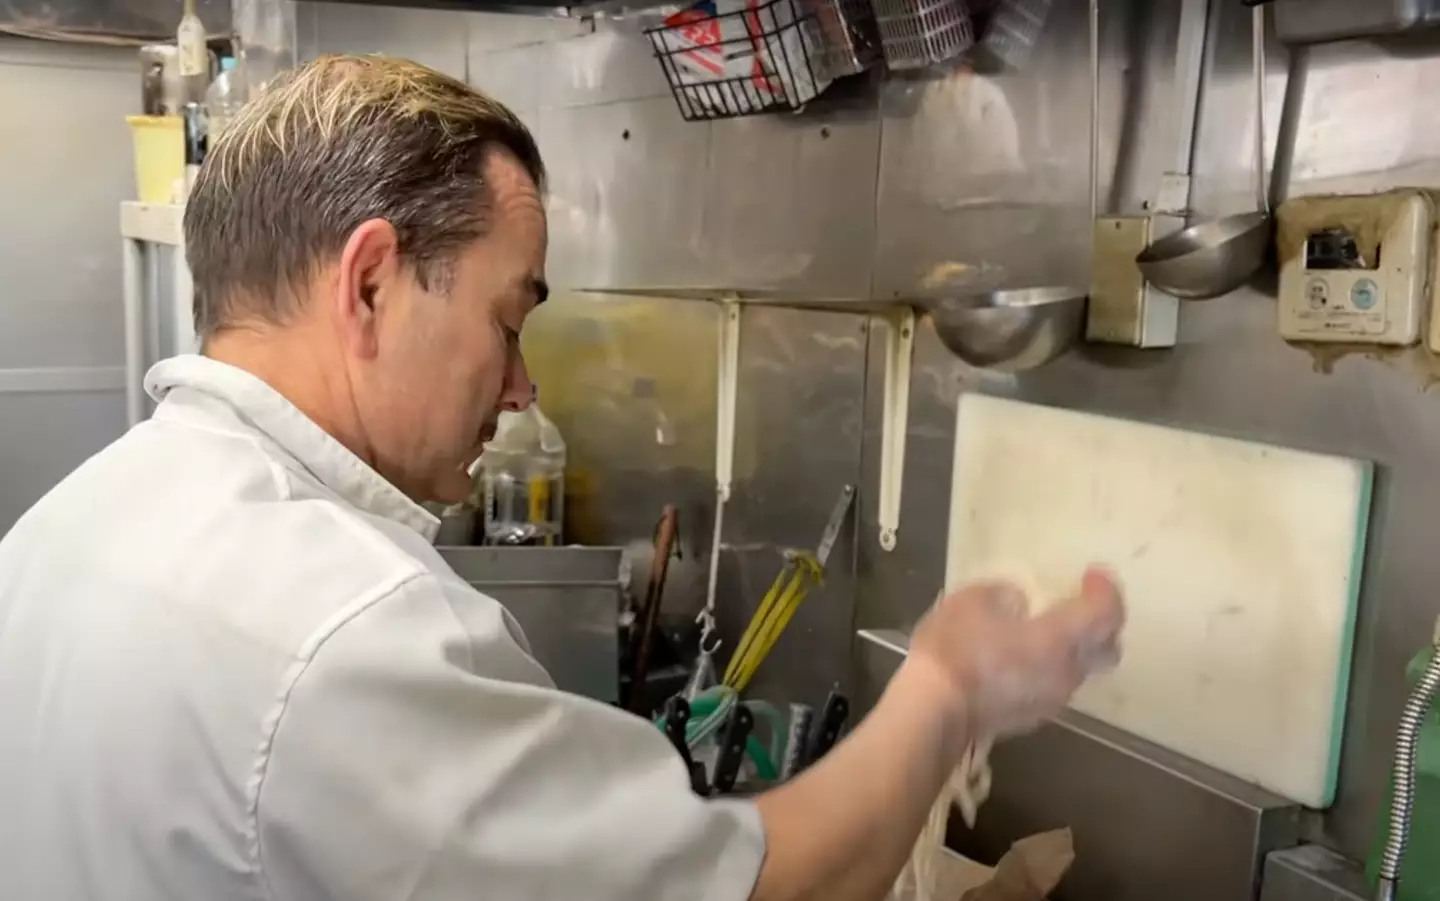 Many online can't get over the chef's accent. (YouTube/Dari Japan)